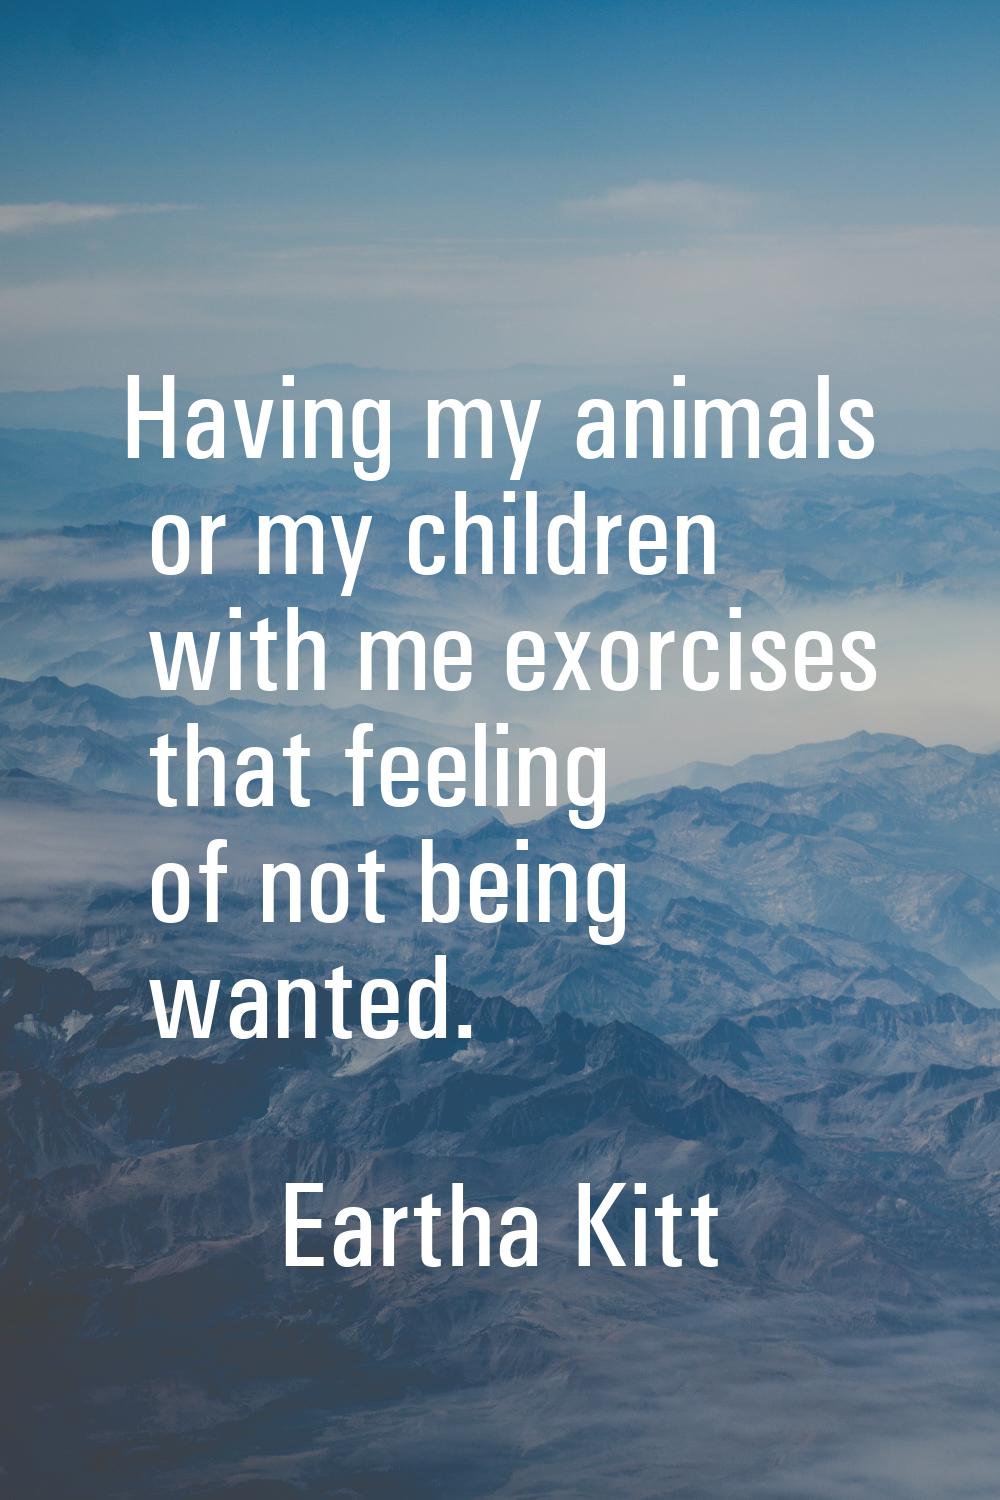 Having my animals or my children with me exorcises that feeling of not being wanted.